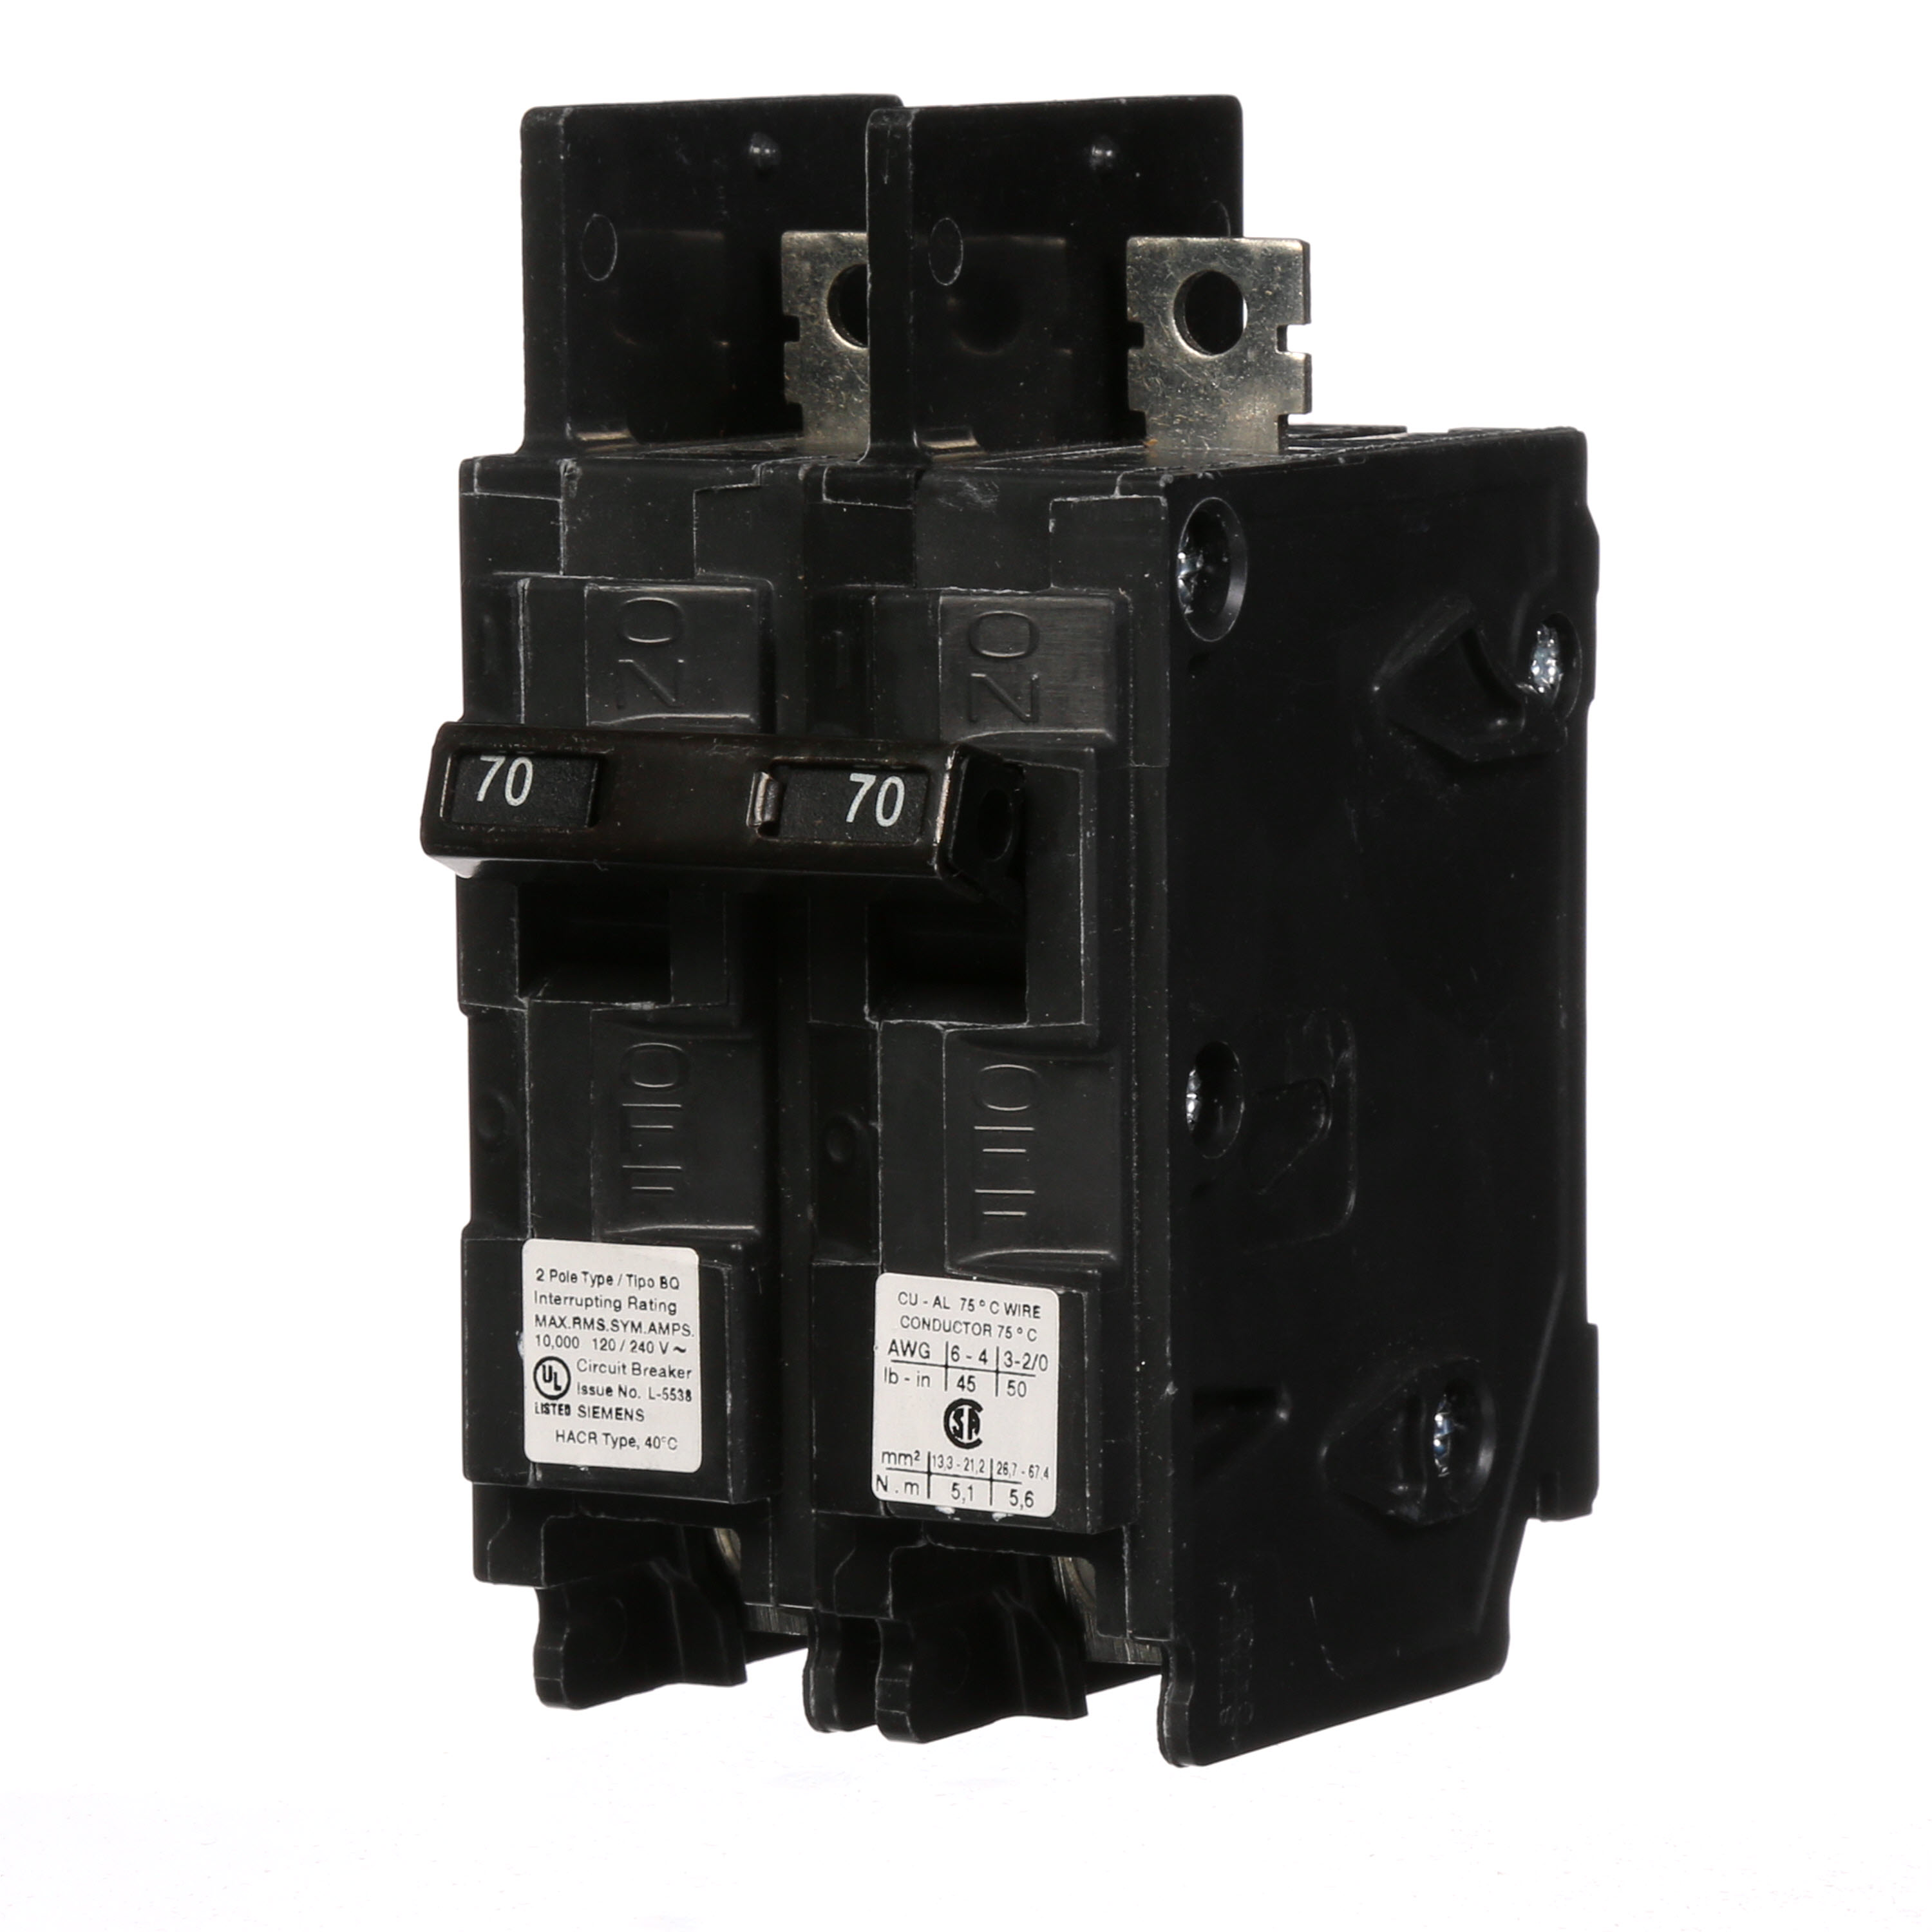 Siemens Low Voltage Molded Case Circuit Breakers General Purpose MCCBs - Type BQ, 2-Pole, 120/240VAC are Circuit Protection Molded Case Circuit Breakers. 2-Pole Common-Trip circuit breaker type BQ. Rated 120/240V (070A) (AIR 10 kA). Special features Load side lugs are included.